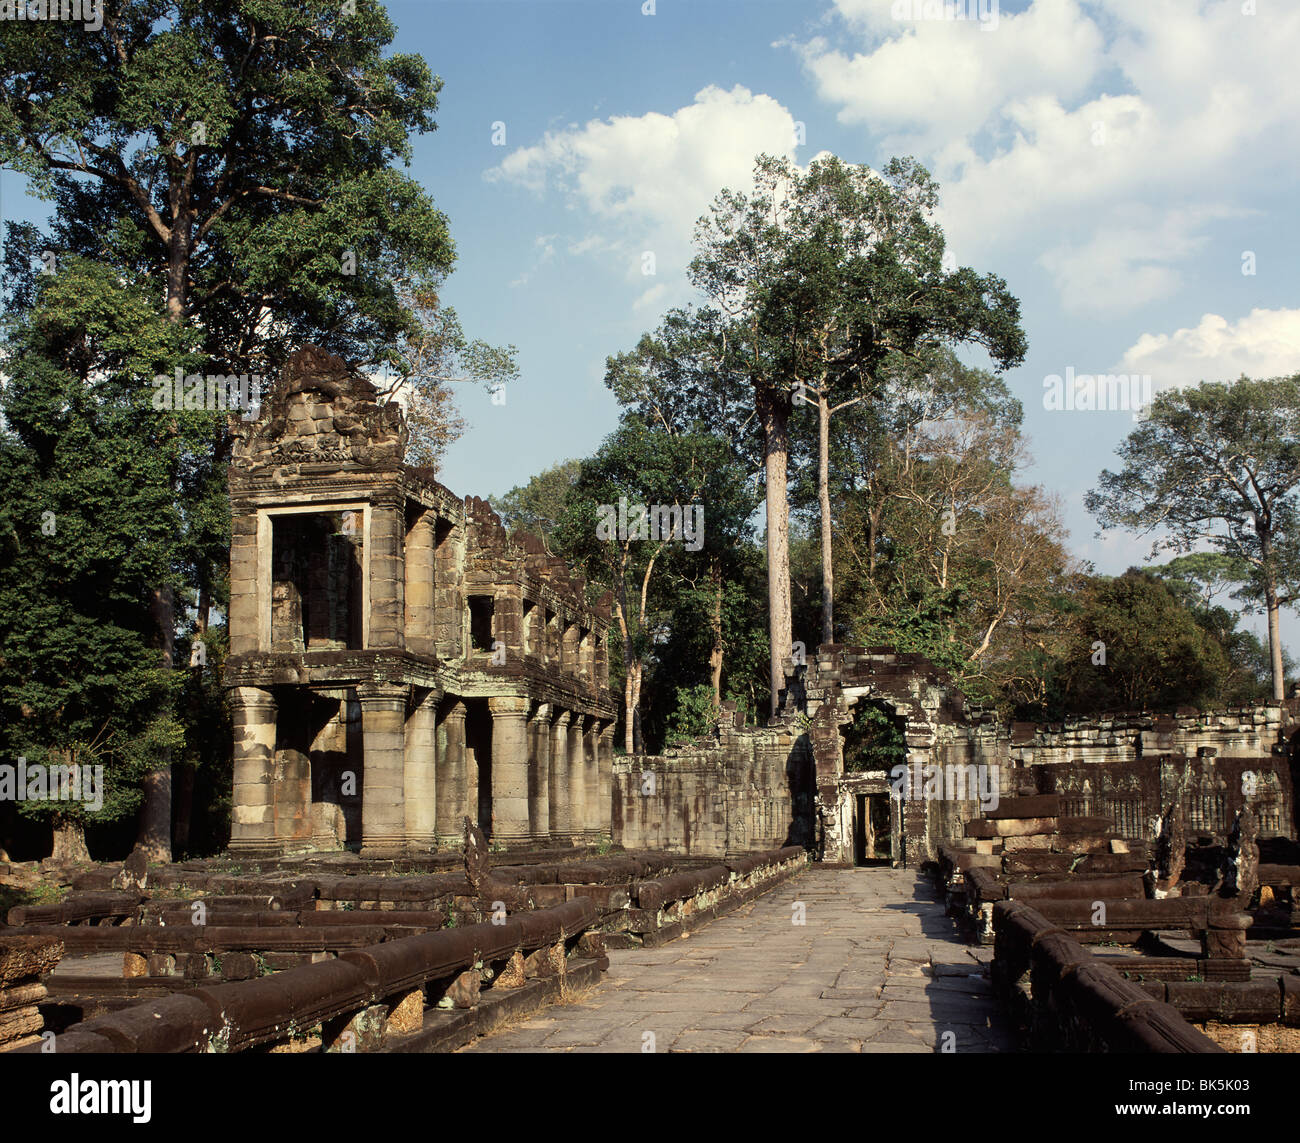 Preah Khan, dating from the late 12th century, Angkor, UNESCO World Heritage Site, Cambodia, Indochina, Southeast Asia, Asia Stock Photo